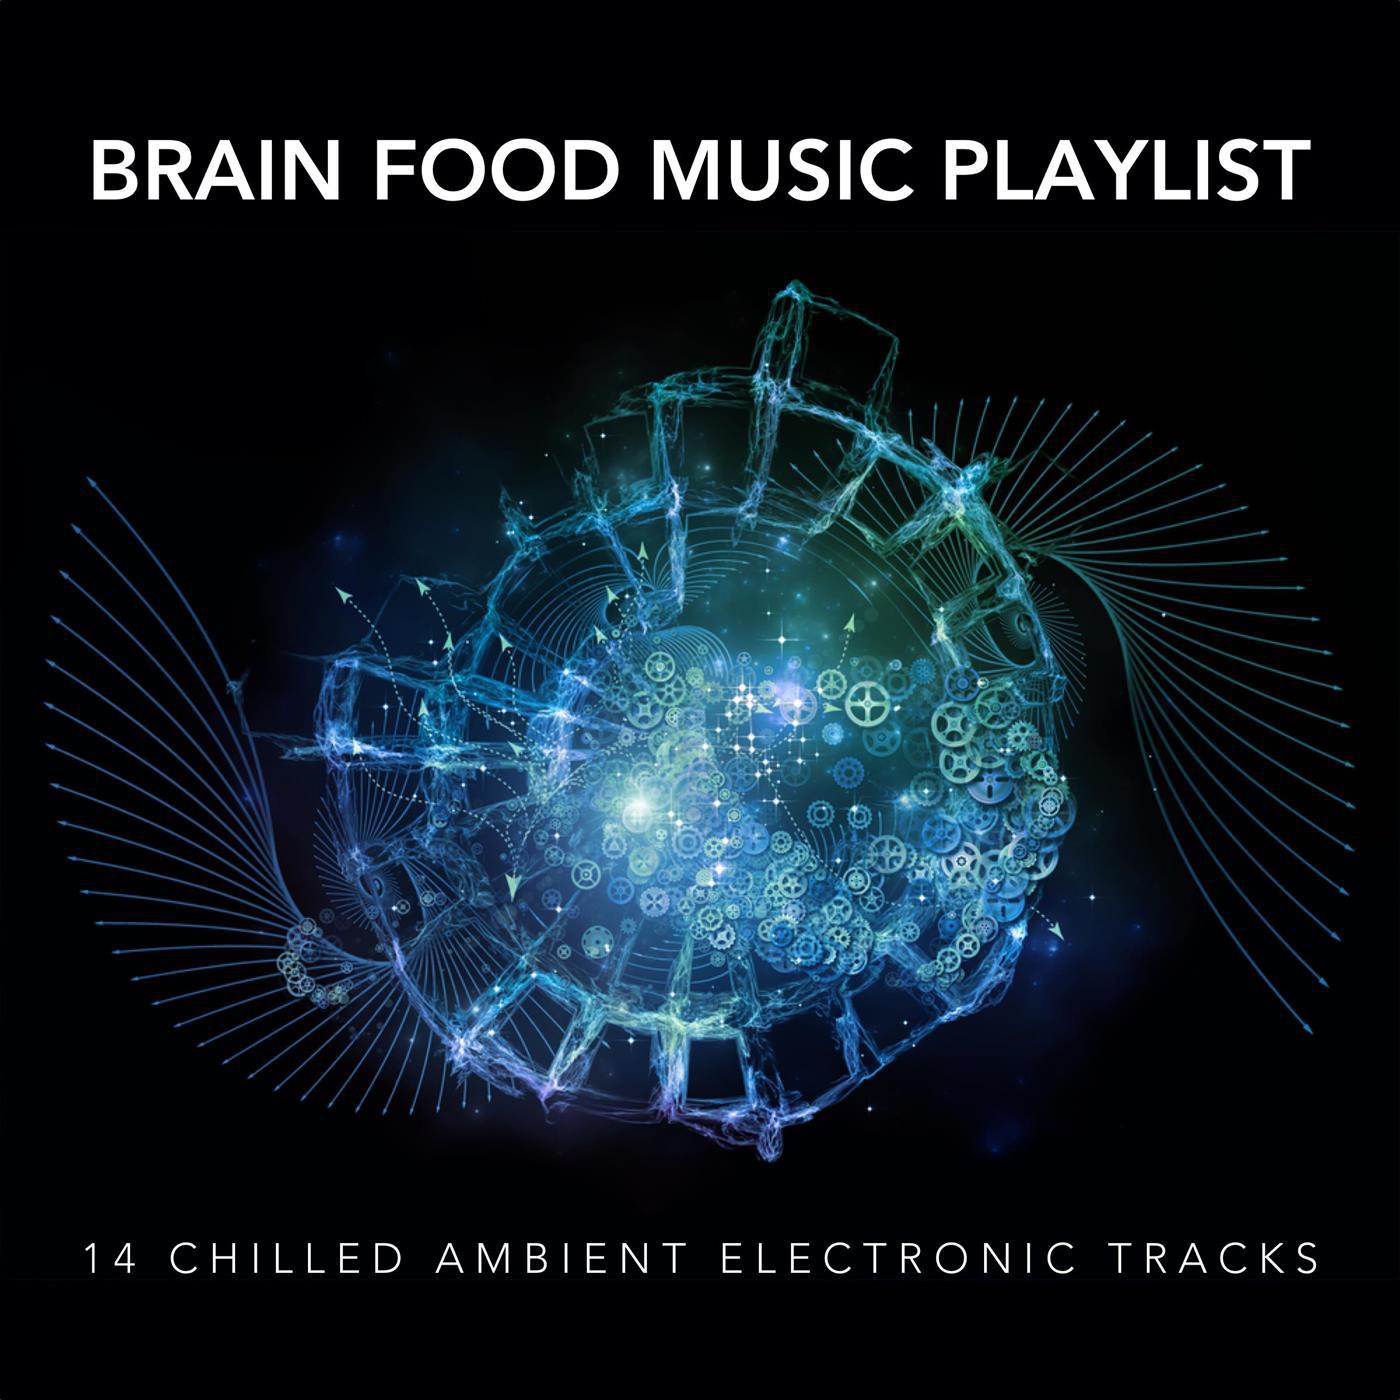 Brain Food Music Playlist: 14 Chilled Ambient Electronic Tracks专辑